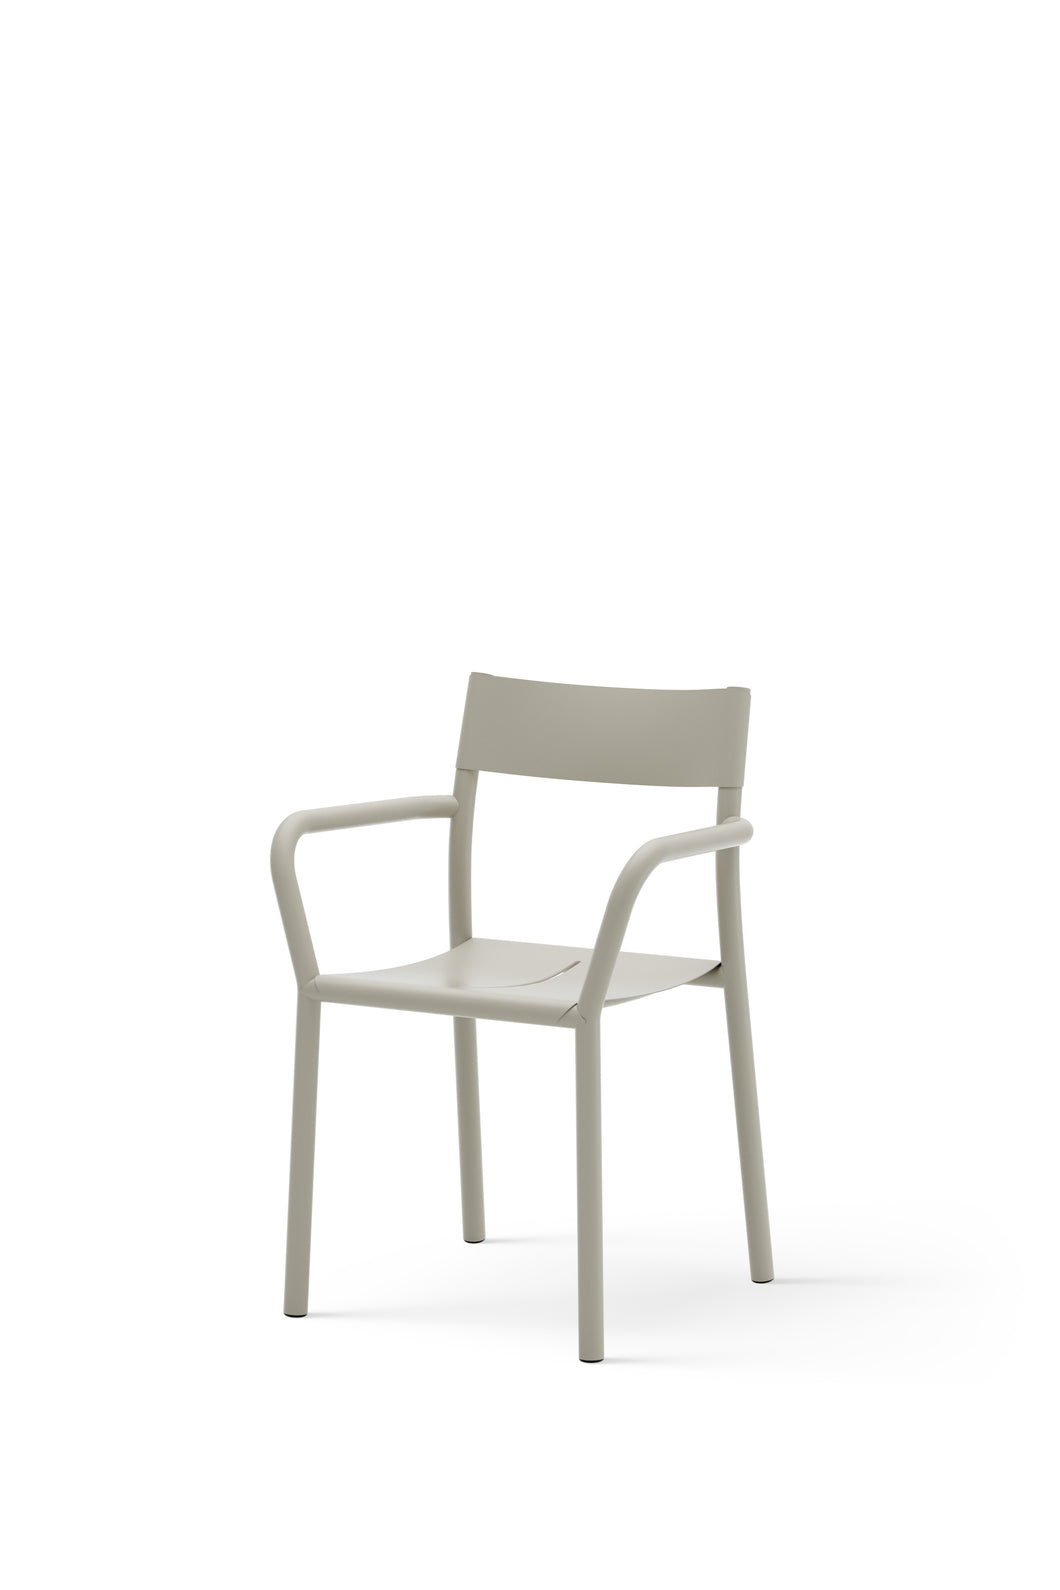 May Armchair- Set of 2 chairs